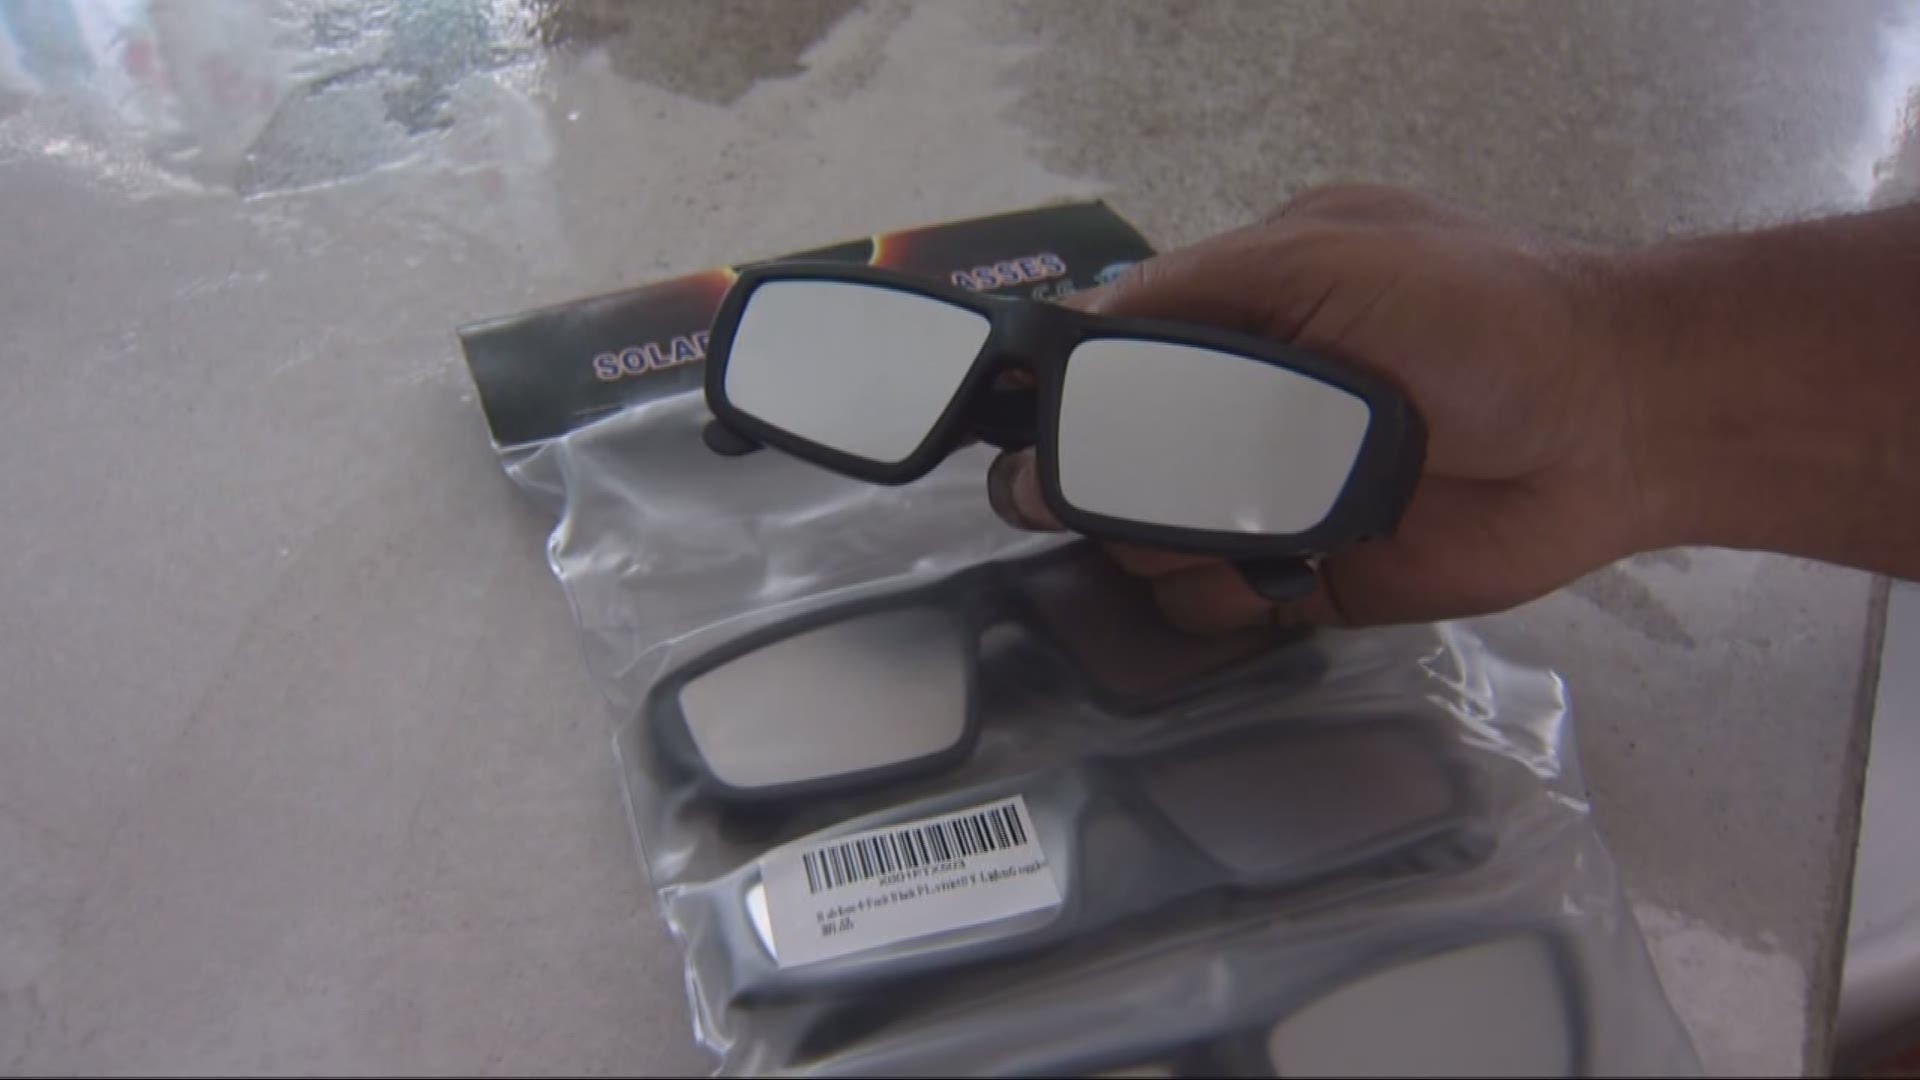 Amazon eclipse glasses recall creates panic for buyers, sellers